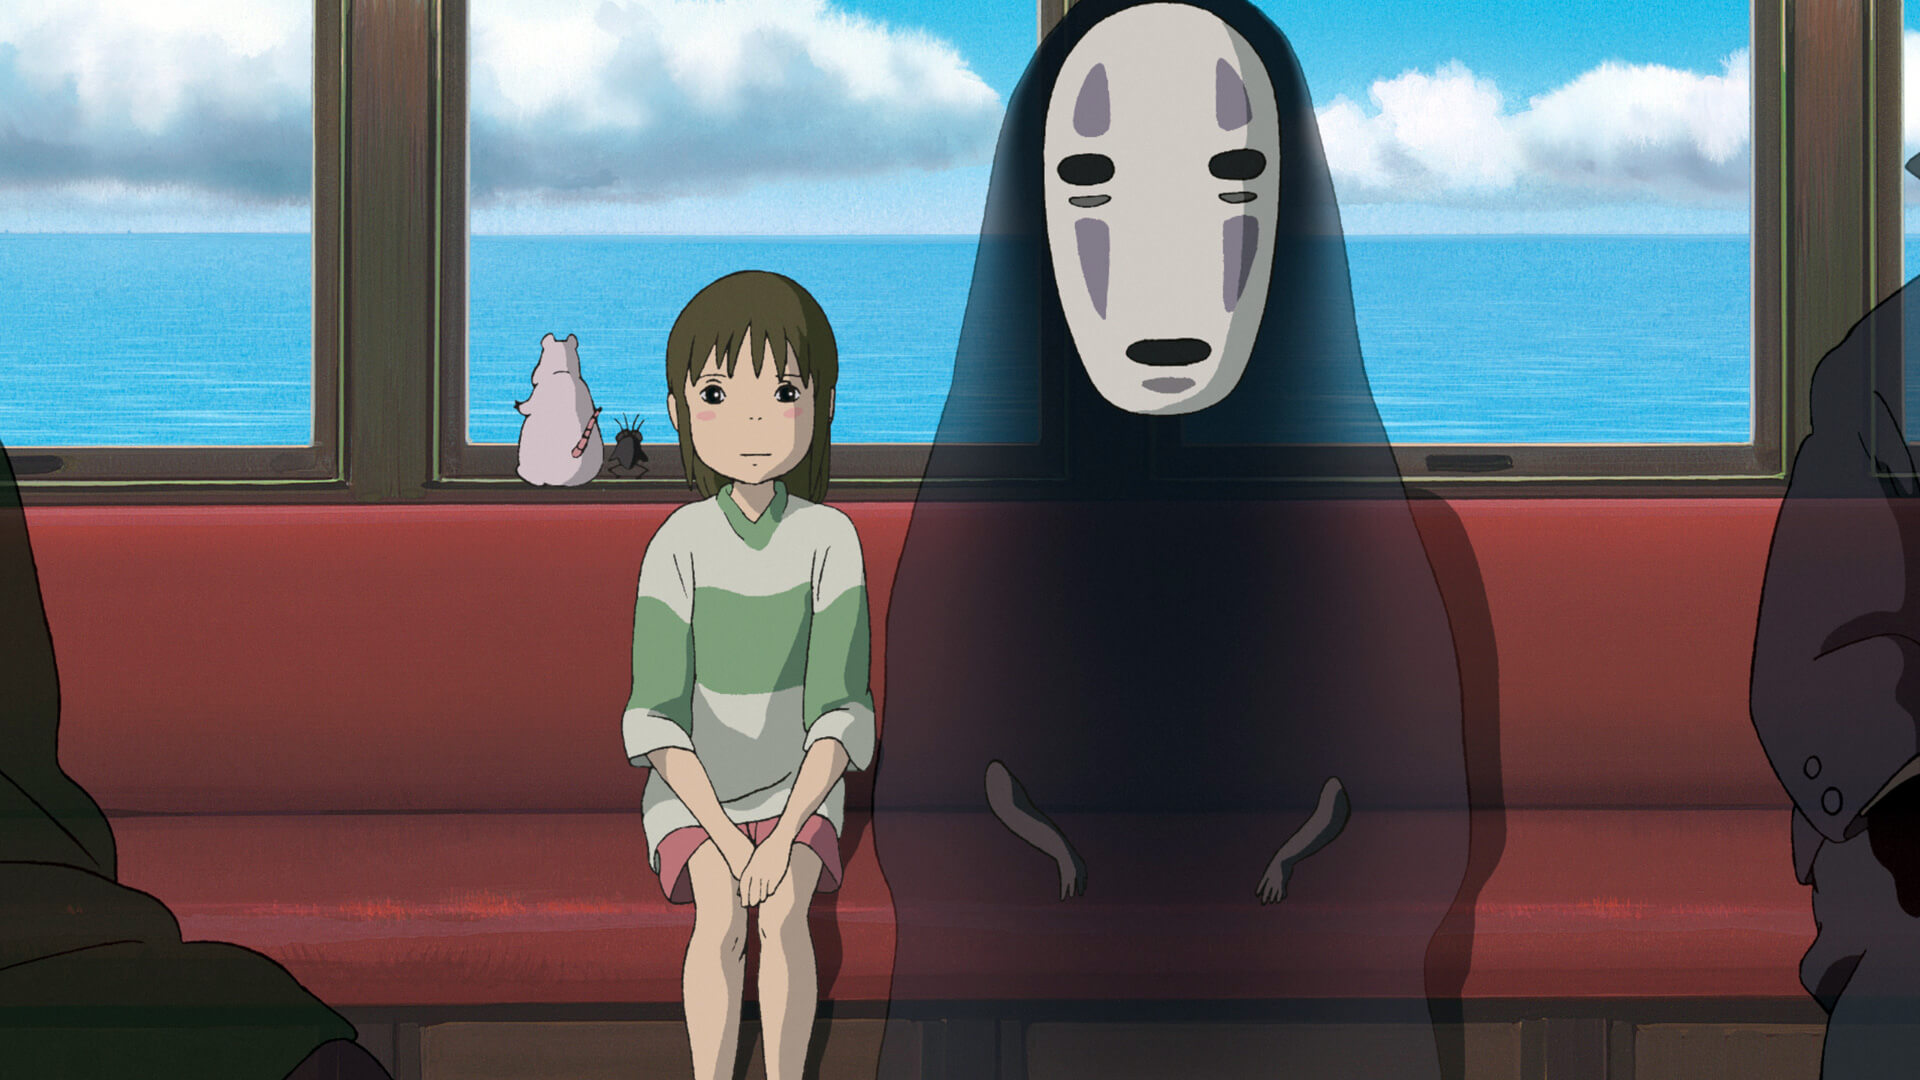 Studio Ghibli Movies Ranked - Check Out the Best